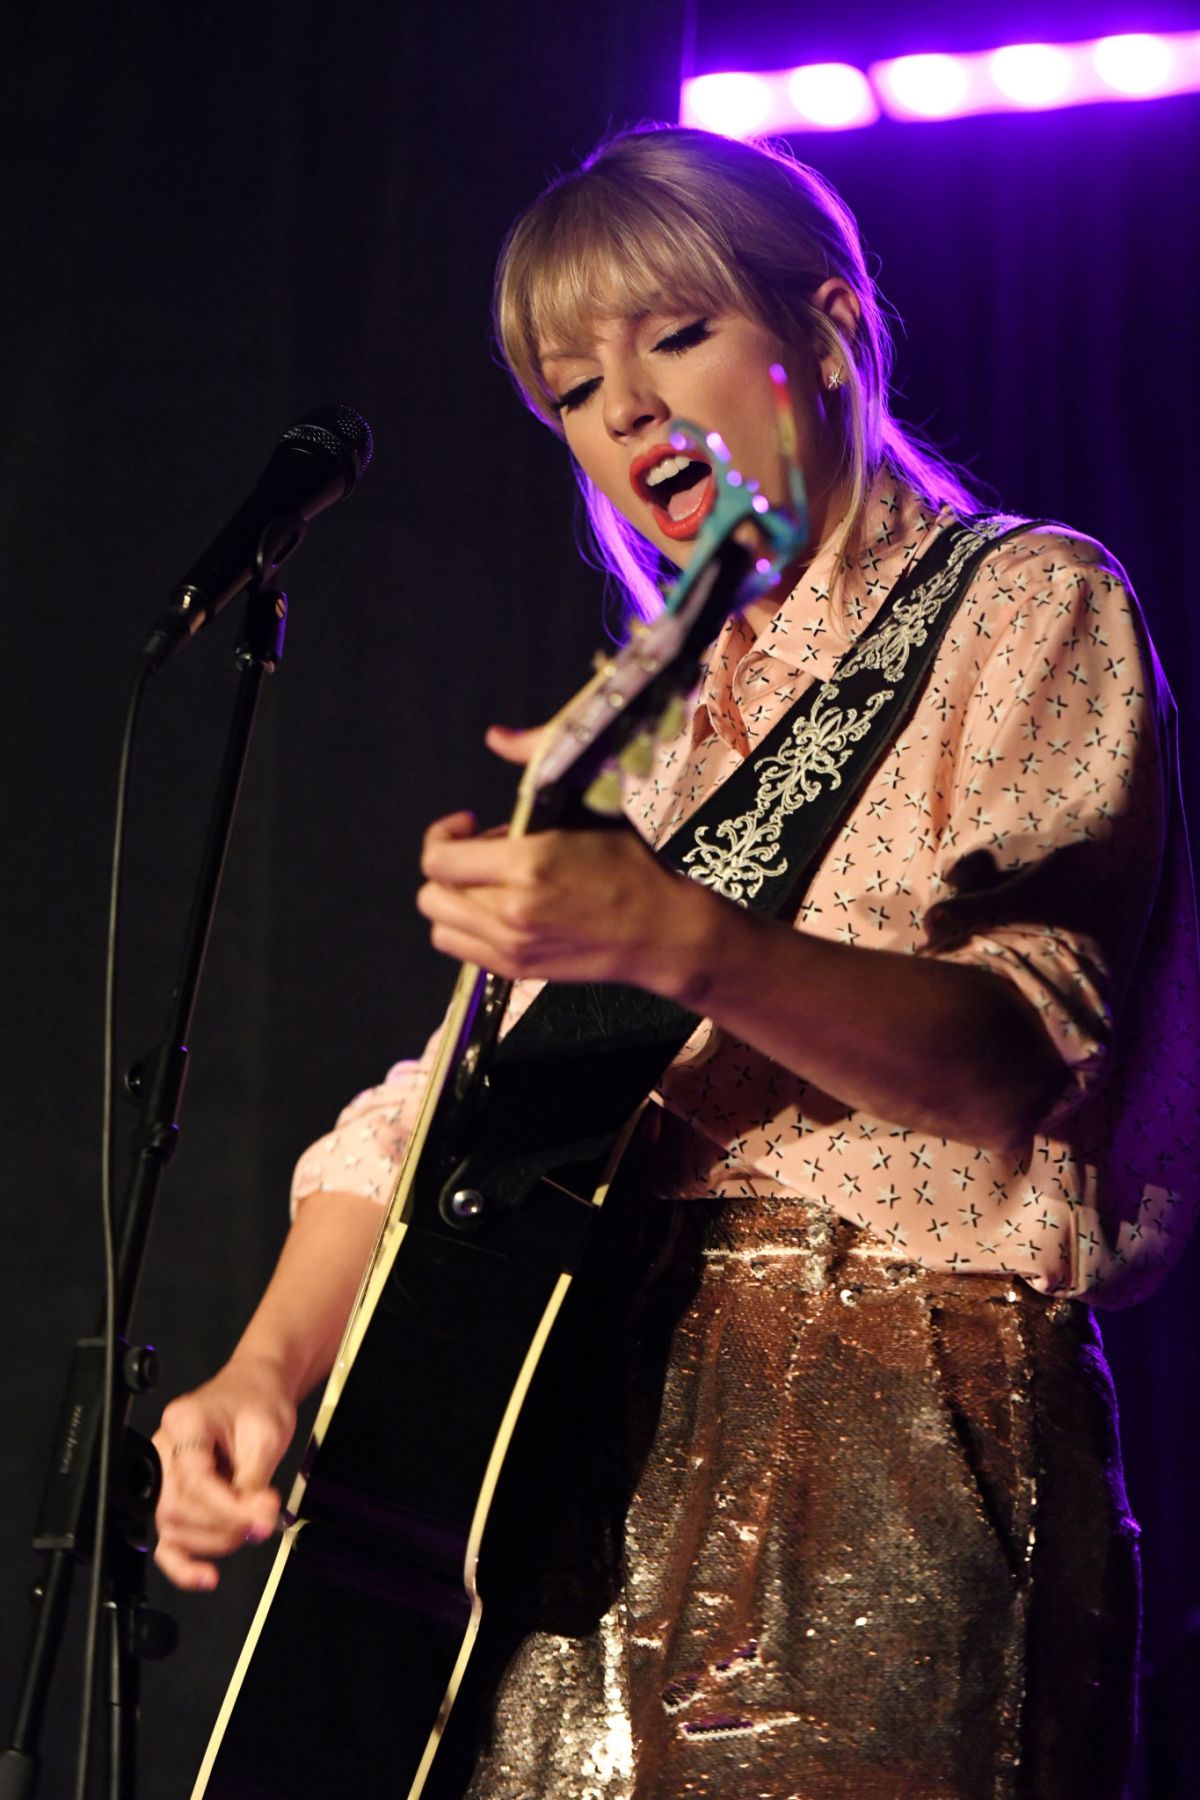 taylor-swift-performs-at-stonewall-inn-in-new-york-06-14-2019-2.jpg